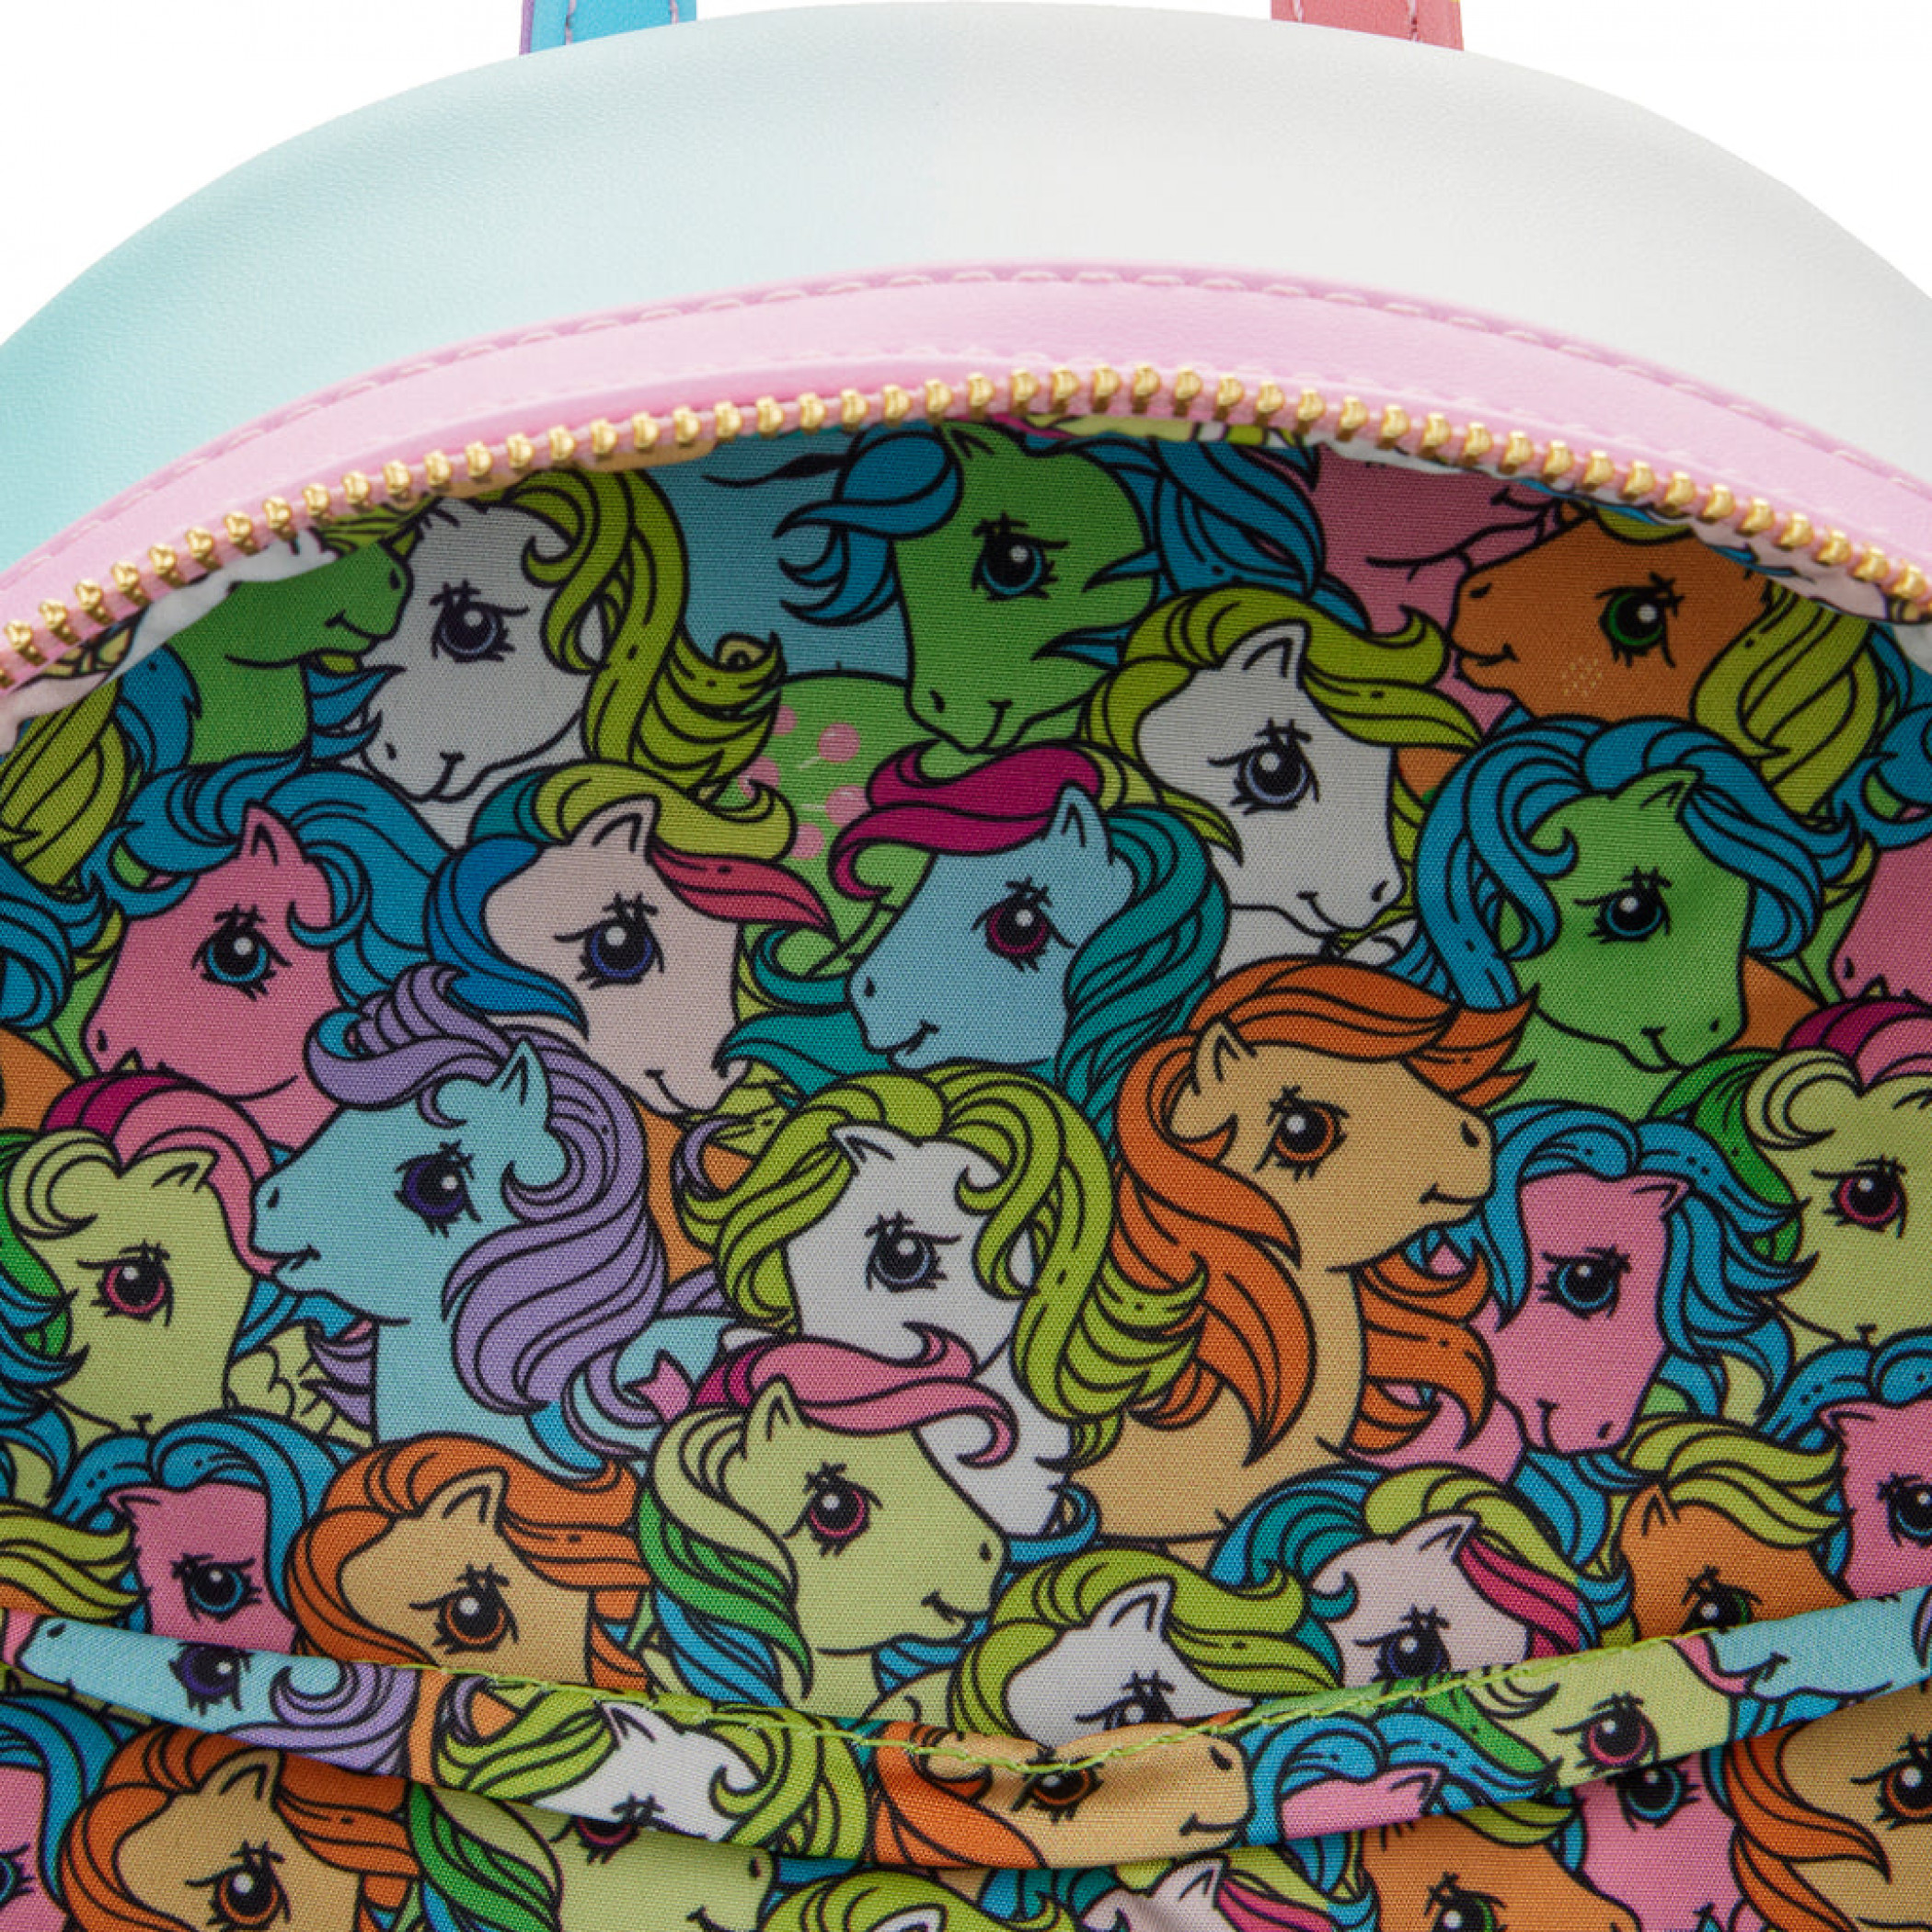 My Little Pony Castle with Drawbridge Mini Backpack by Loungefly